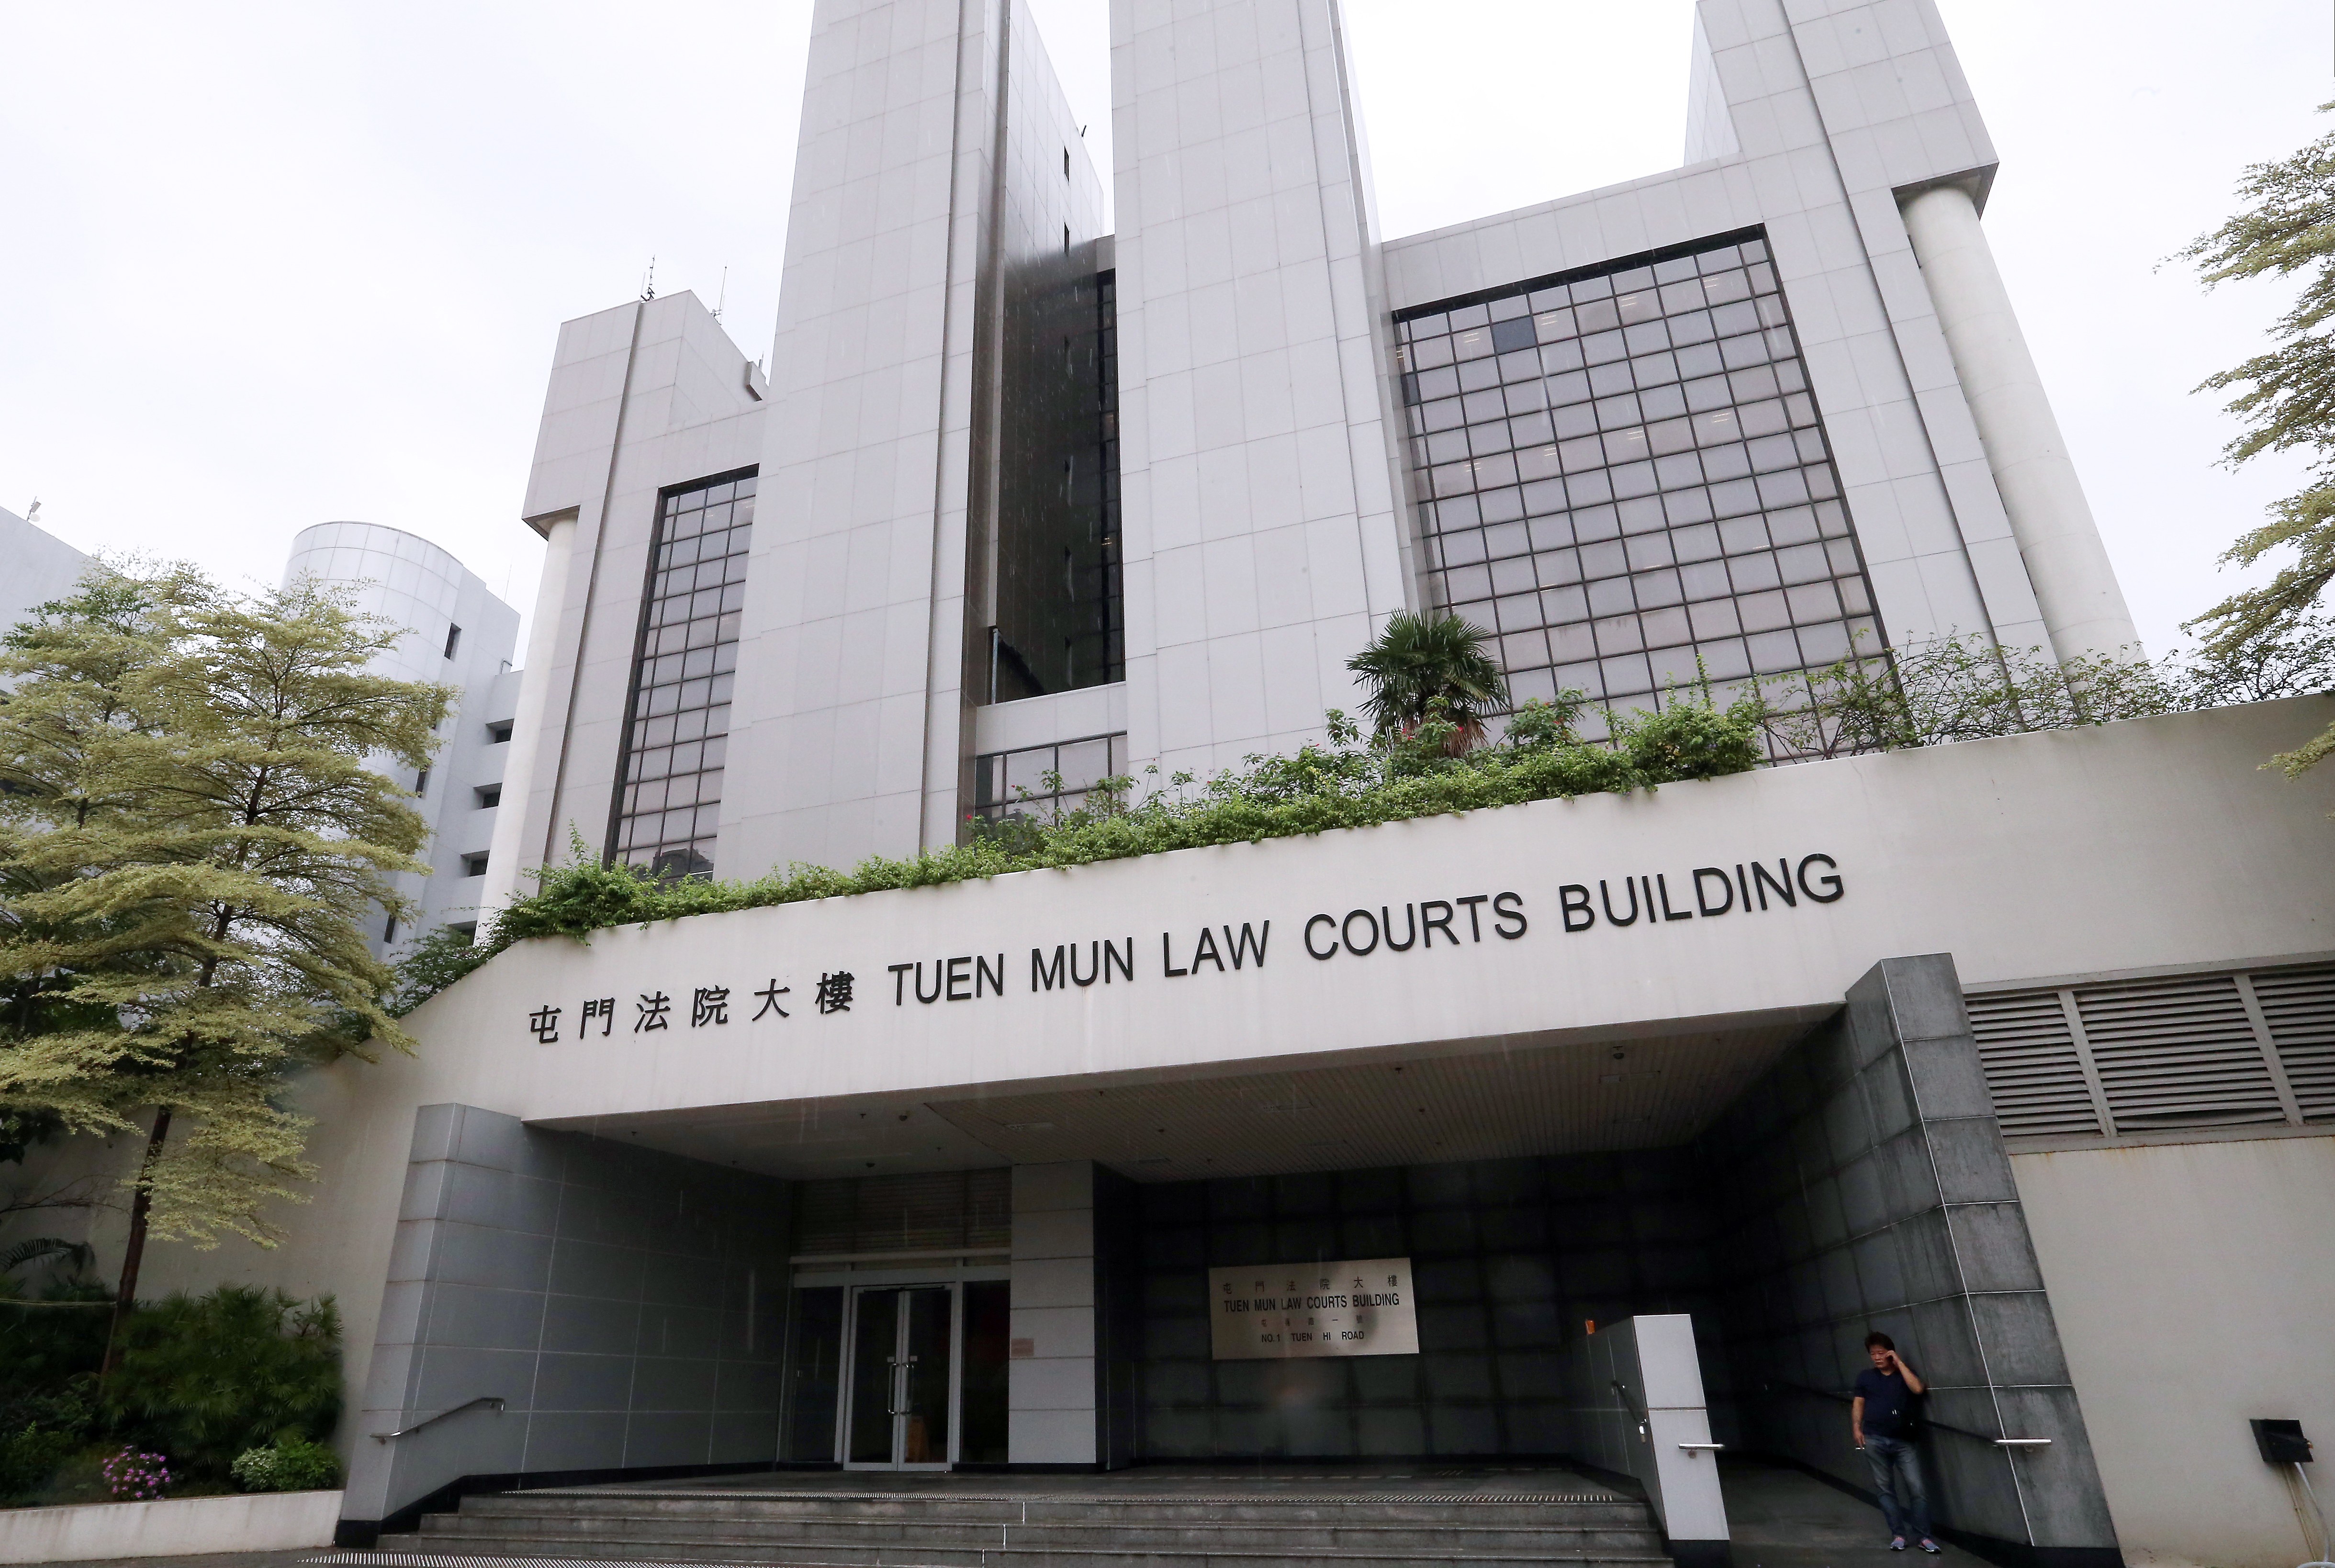 The court heard that Ng Heung-man made complaints to the management office about the damaged ceiling but received no response.